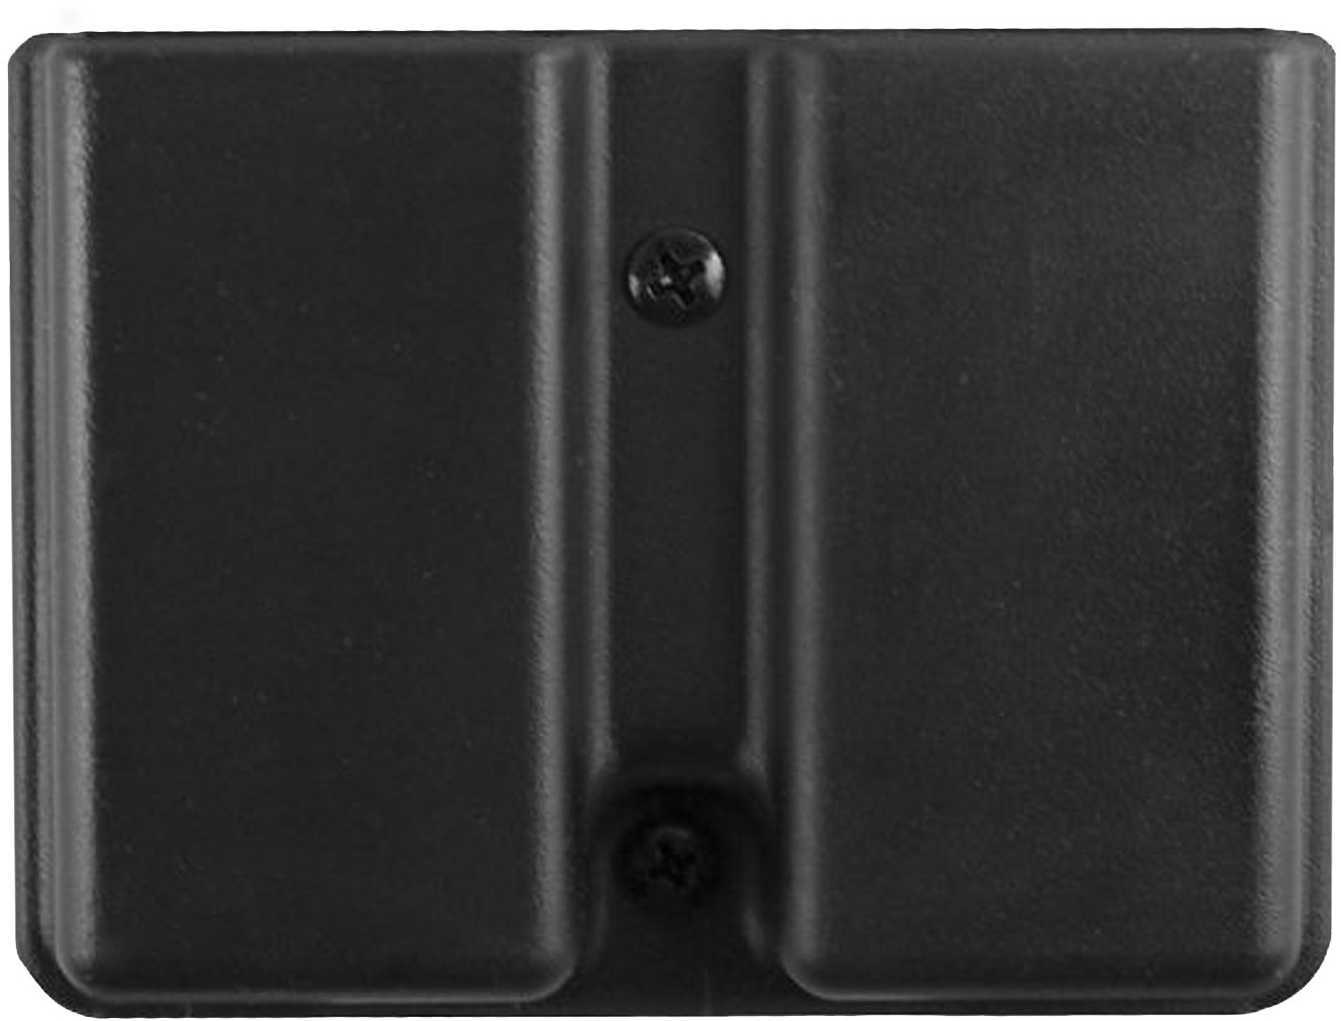 Uncle Mikes Kydex Double Mag Case Single Row Belt Model Fits Loops Up To 1.75" Or Can Clipped Over a Waistband